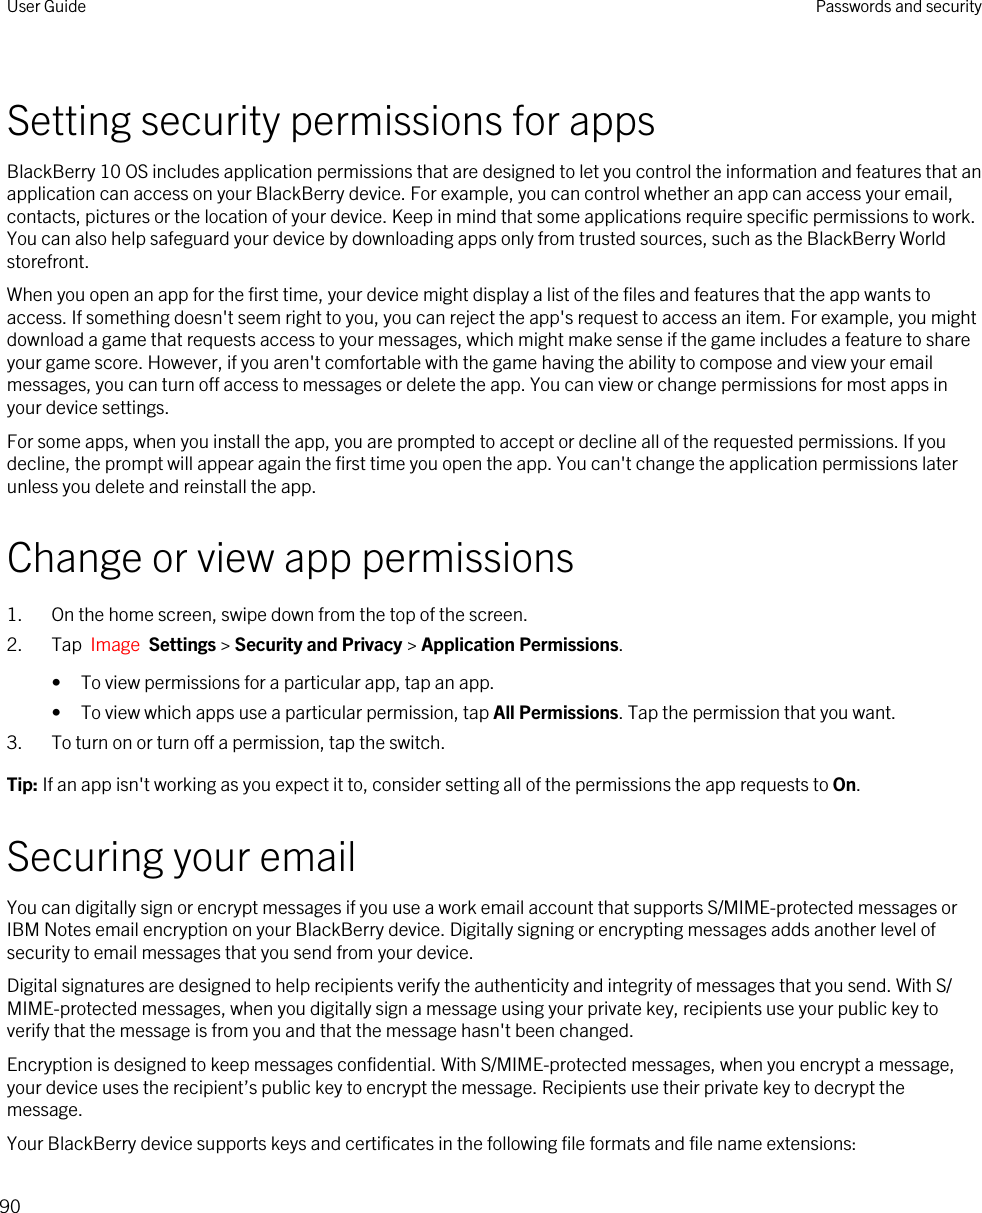 Setting security permissions for appsBlackBerry 10 OS includes application permissions that are designed to let you control the information and features that an application can access on your BlackBerry device. For example, you can control whether an app can access your email, contacts, pictures or the location of your device. Keep in mind that some applications require specific permissions to work. You can also help safeguard your device by downloading apps only from trusted sources, such as the BlackBerry World storefront.When you open an app for the first time, your device might display a list of the files and features that the app wants to access. If something doesn&apos;t seem right to you, you can reject the app&apos;s request to access an item. For example, you might download a game that requests access to your messages, which might make sense if the game includes a feature to share your game score. However, if you aren&apos;t comfortable with the game having the ability to compose and view your email messages, you can turn off access to messages or delete the app. You can view or change permissions for most apps in your device settings.For some apps, when you install the app, you are prompted to accept or decline all of the requested permissions. If you decline, the prompt will appear again the first time you open the app. You can&apos;t change the application permissions later unless you delete and reinstall the app.Change or view app permissions1. On the home screen, swipe down from the top of the screen.2. Tap  Image  Settings &gt; Security and Privacy &gt; Application Permissions. • To view permissions for a particular app, tap an app.• To view which apps use a particular permission, tap All Permissions. Tap the permission that you want.3. To turn on or turn off a permission, tap the switch.Tip: If an app isn&apos;t working as you expect it to, consider setting all of the permissions the app requests to On.Securing your emailYou can digitally sign or encrypt messages if you use a work email account that supports S/MIME-protected messages or IBM Notes email encryption on your BlackBerry device. Digitally signing or encrypting messages adds another level of security to email messages that you send from your device.Digital signatures are designed to help recipients verify the authenticity and integrity of messages that you send. With S/MIME-protected messages, when you digitally sign a message using your private key, recipients use your public key to verify that the message is from you and that the message hasn&apos;t been changed.Encryption is designed to keep messages confidential. With S/MIME-protected messages, when you encrypt a message, your device uses the recipient’s public key to encrypt the message. Recipients use their private key to decrypt the message.Your BlackBerry device supports keys and certificates in the following file formats and file name extensions:User Guide Passwords and security90